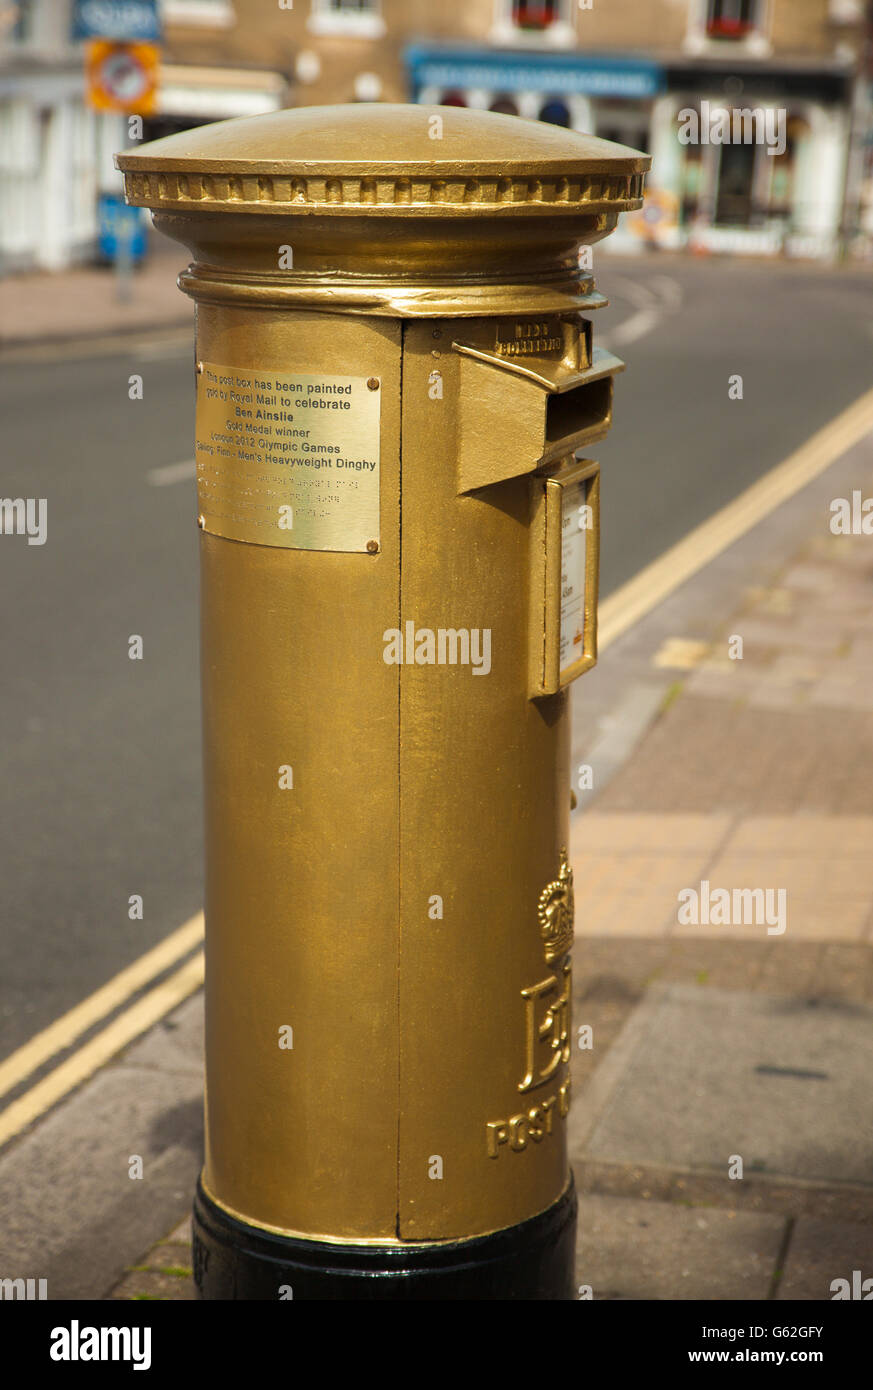 The Ben Ainslie gold post box celebrating his London 2012 Olympic gold medal for sailing, at Lymington. Stock Photo